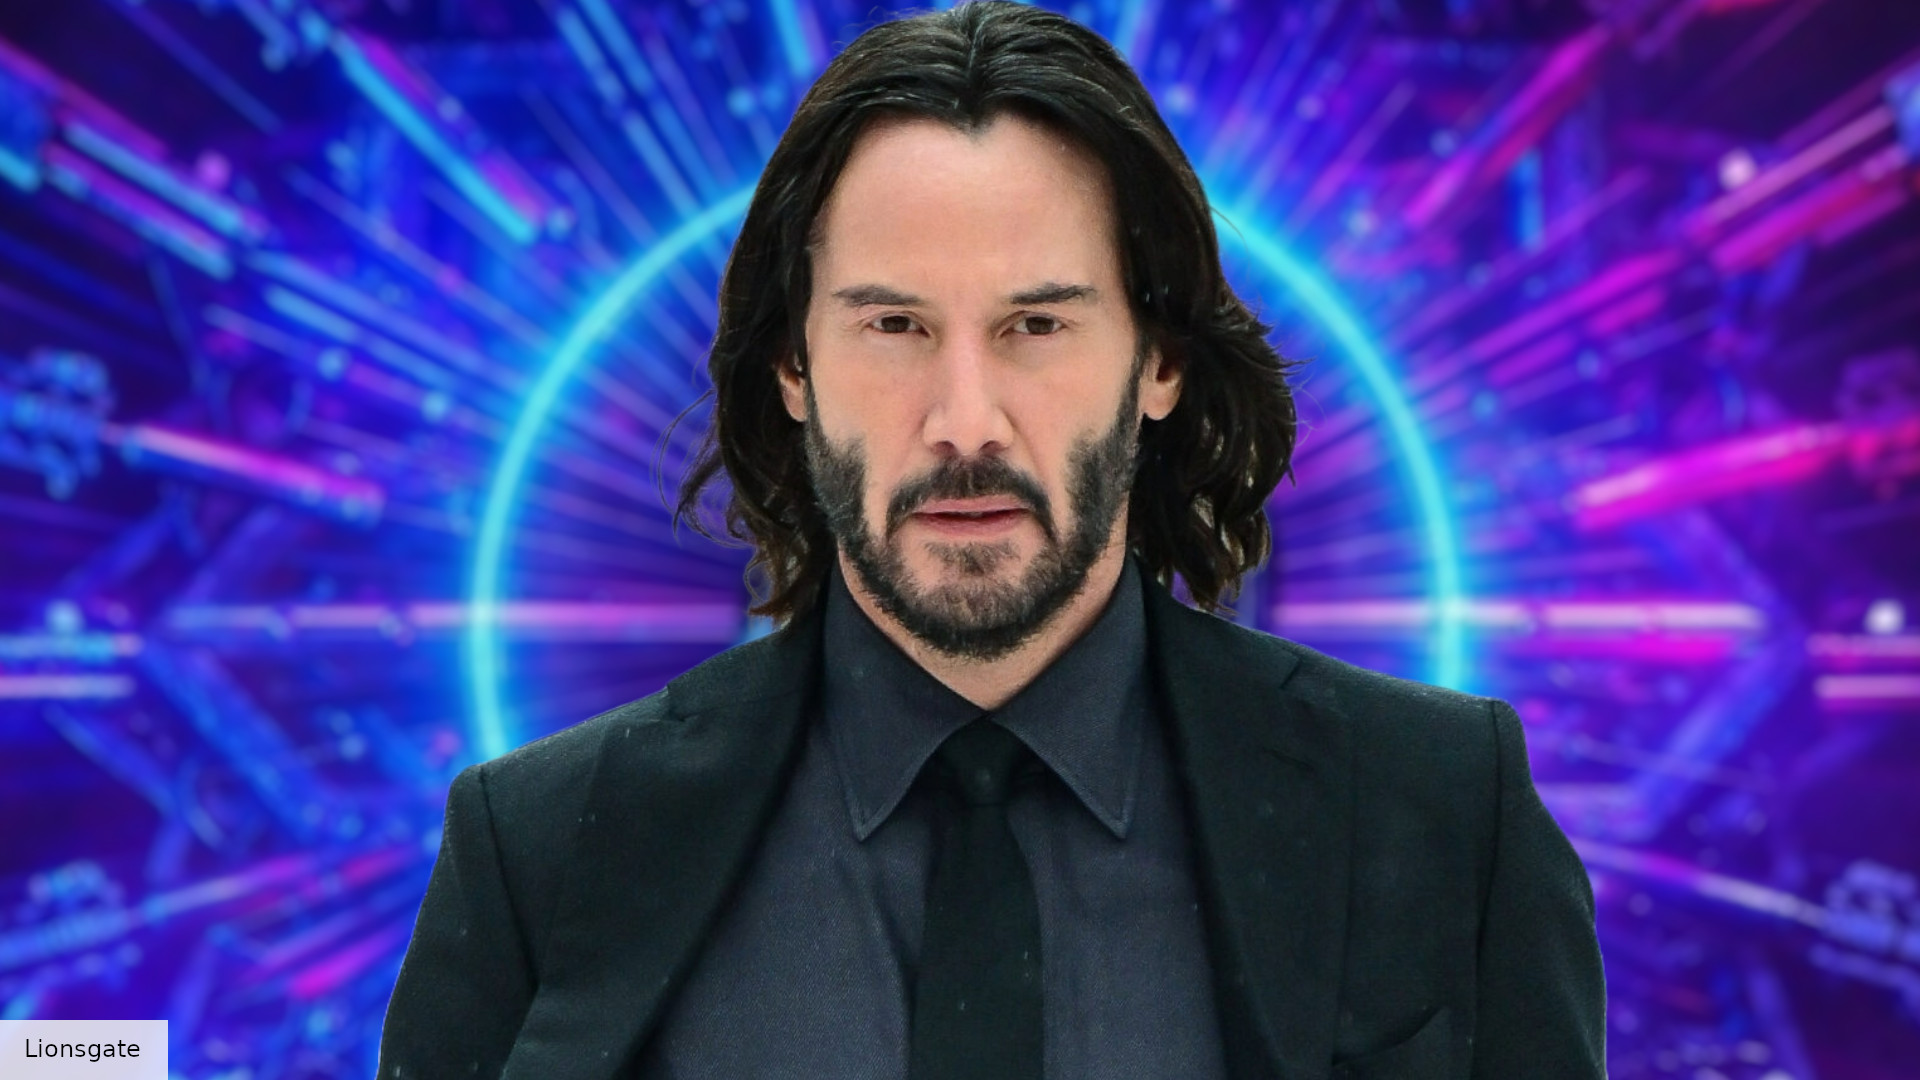 John Wick 5 'Almost' Gets Confirmed By Director